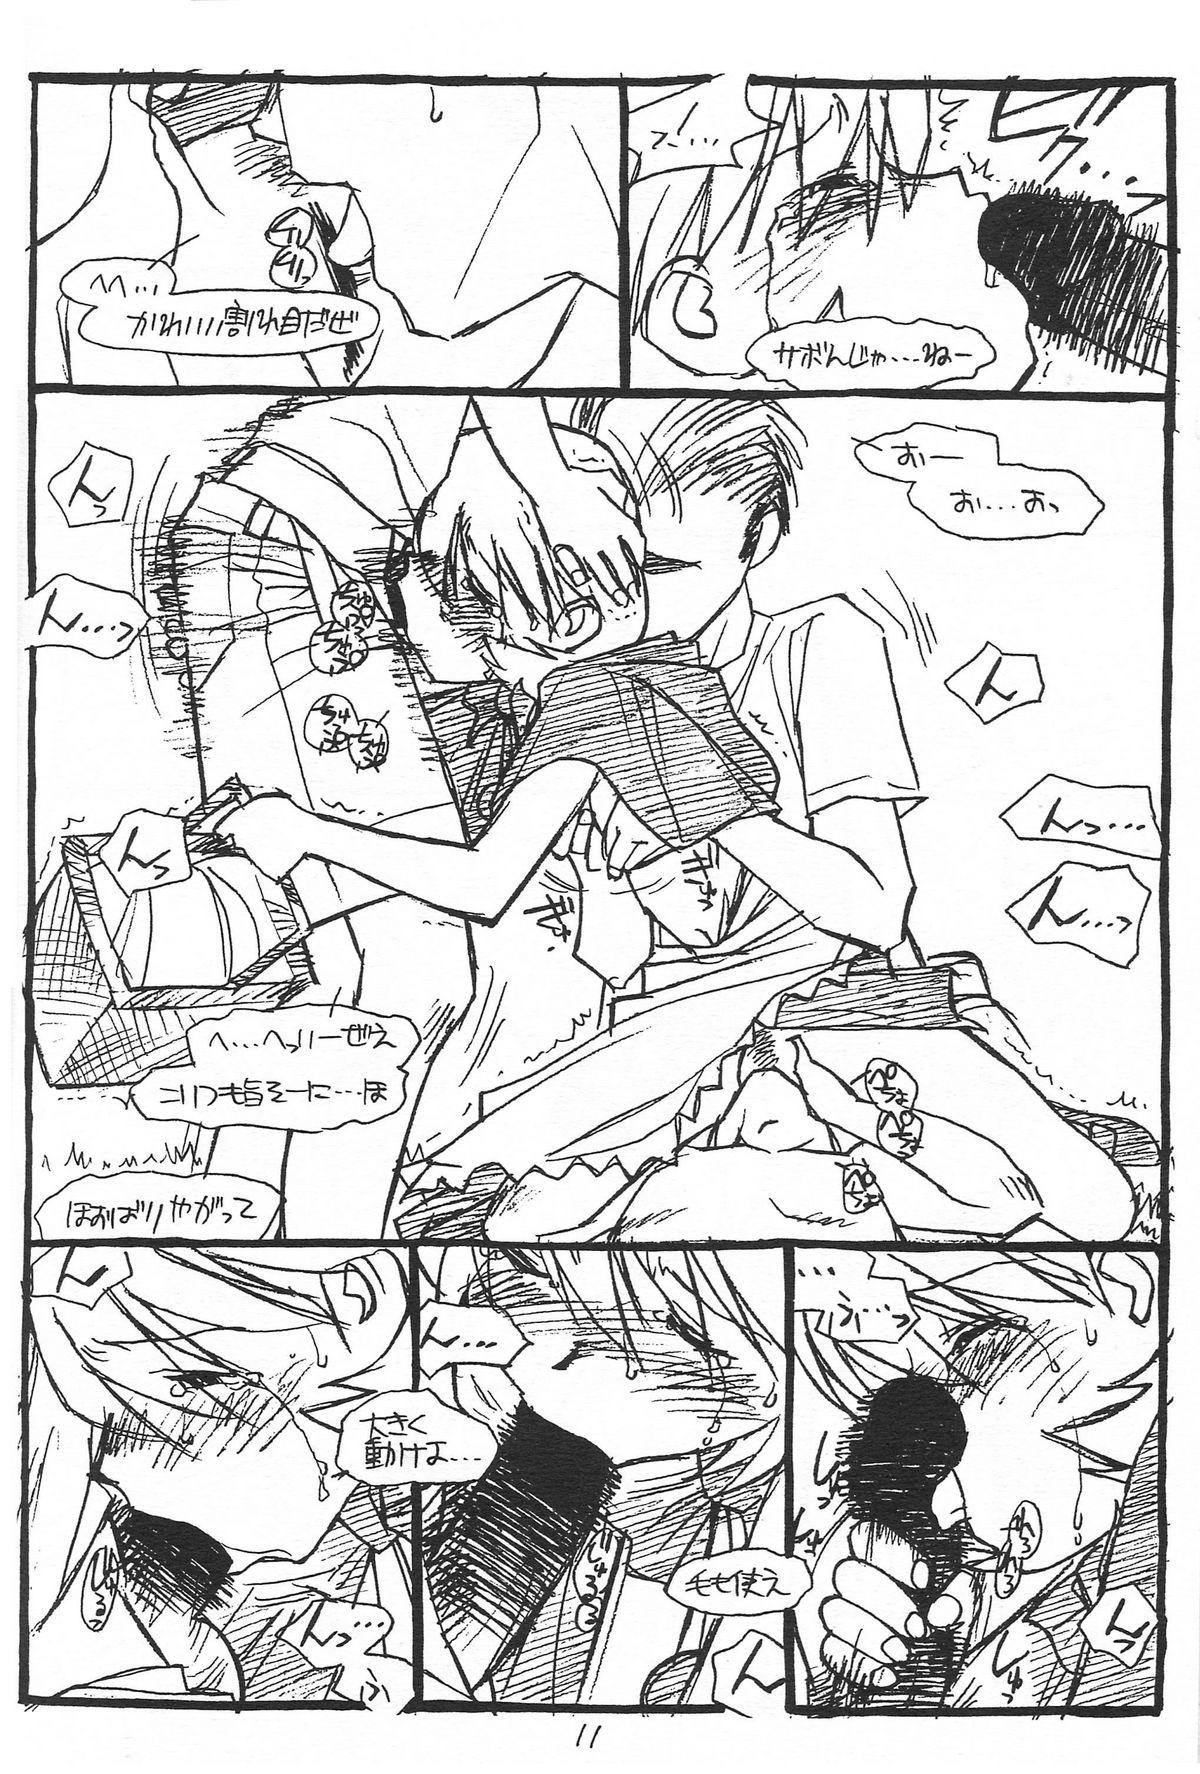 Roughsex Show Time Buletta - Darkstalkers Spain - Page 10